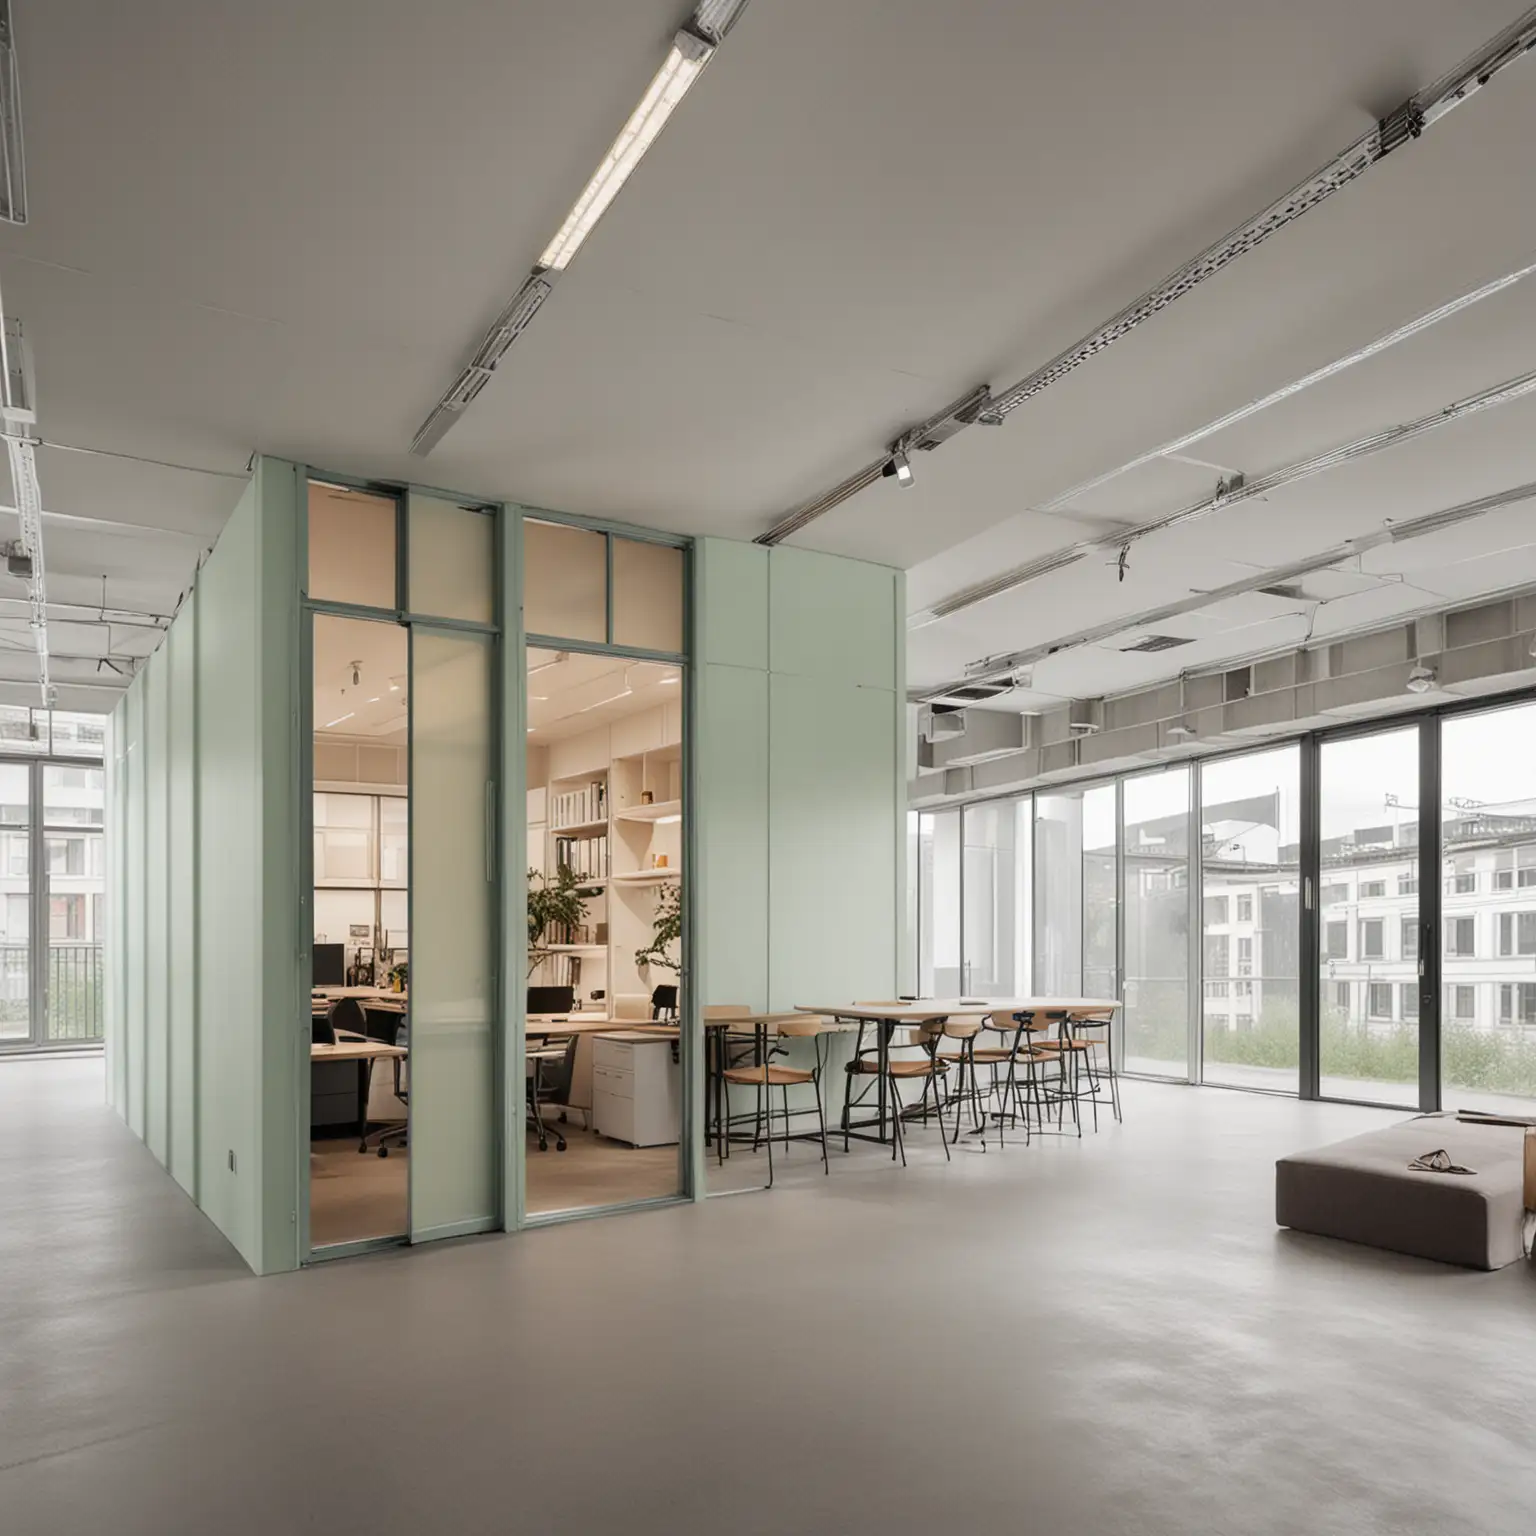 Modular space in space system of a designer office, closed on the upper side, rectangular pavilion, friendly color mood, bright open room and frameless windows